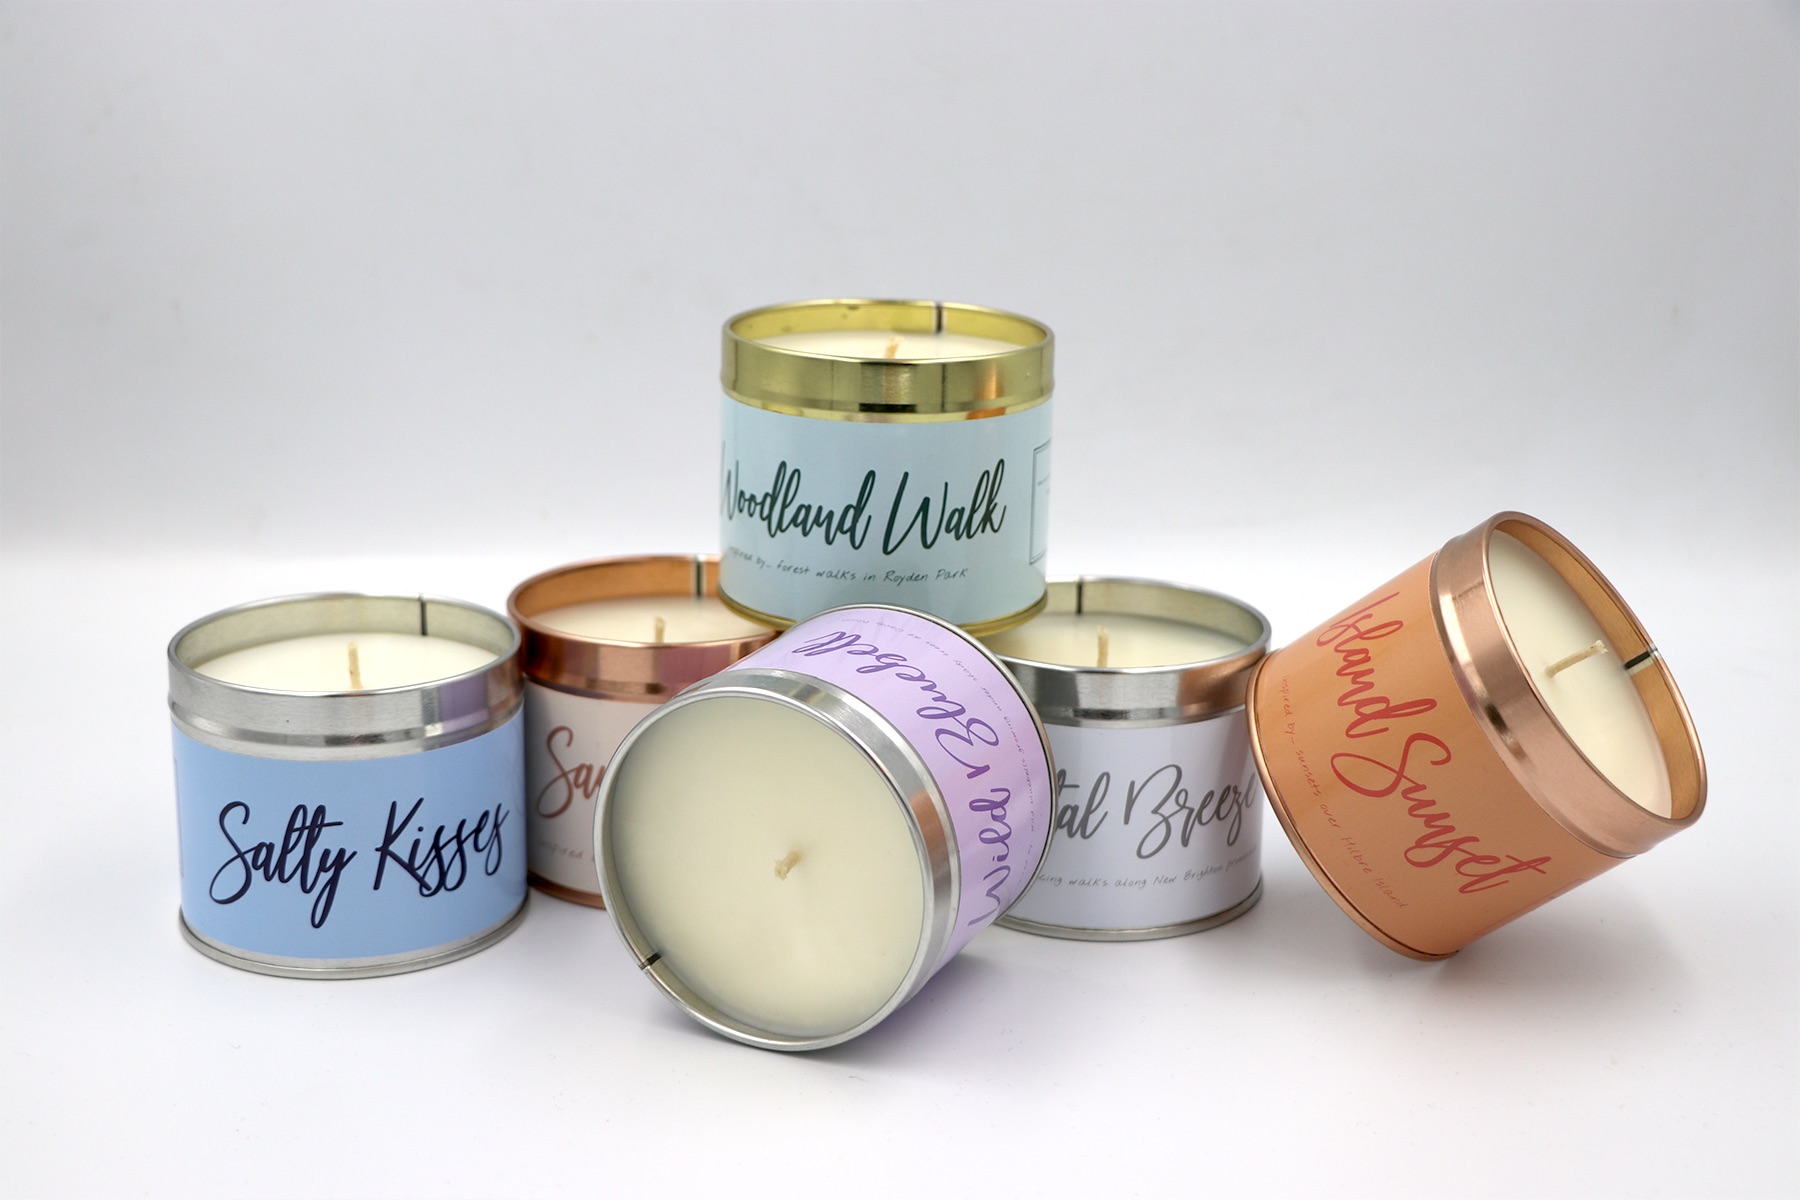 ‘Inspirational Wirral’ Candles